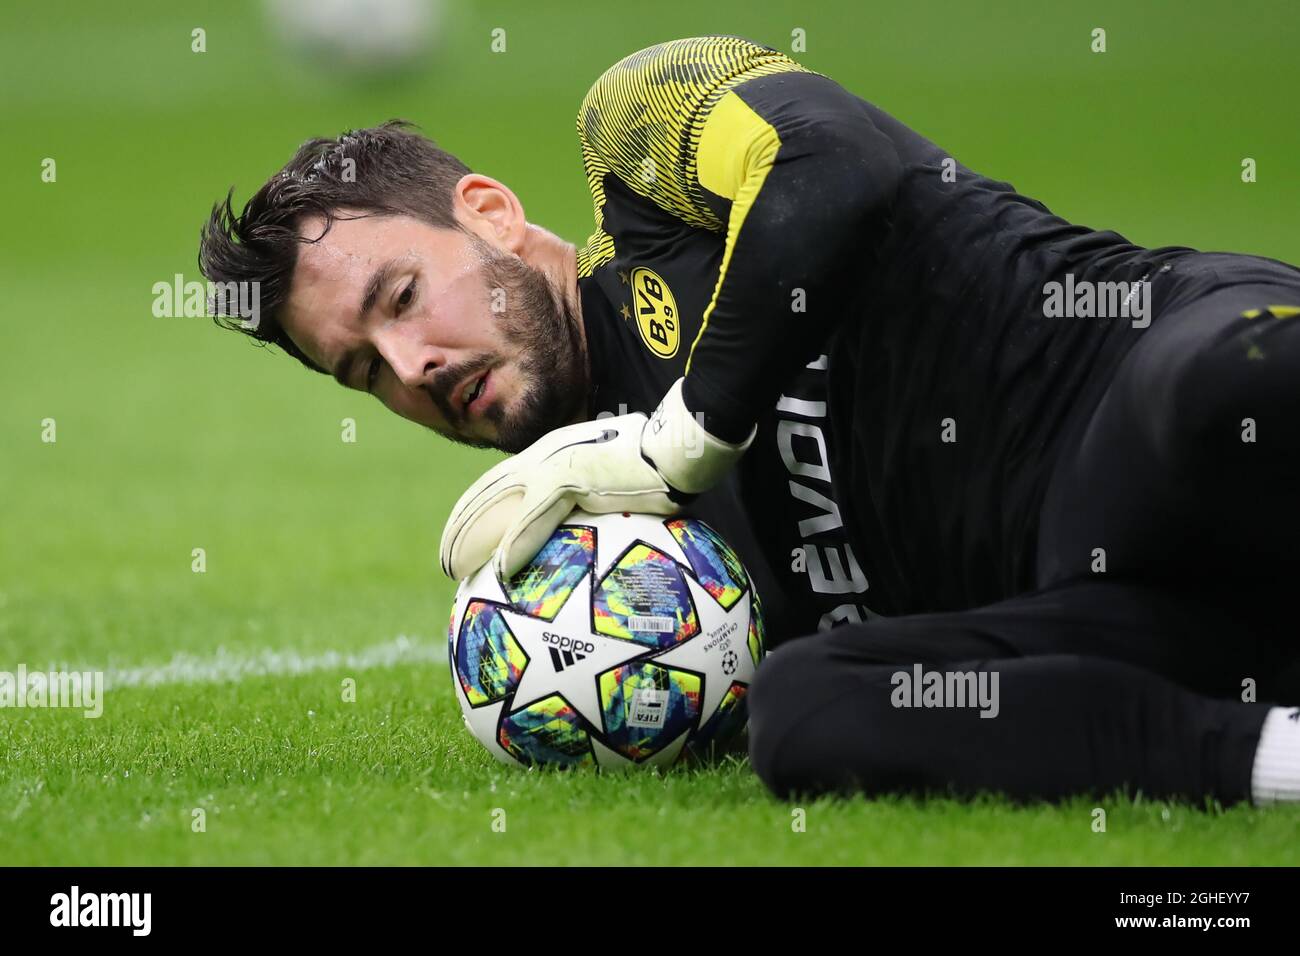 Roman Burki of Borussia Dortmund during the UEFA Champions League match at Giuseppe Meazza, Milan. Picture date: 23rd October 2019. Picture credit should read: Jonathan Moscrop/Sportimage via PA Images Stock Photo